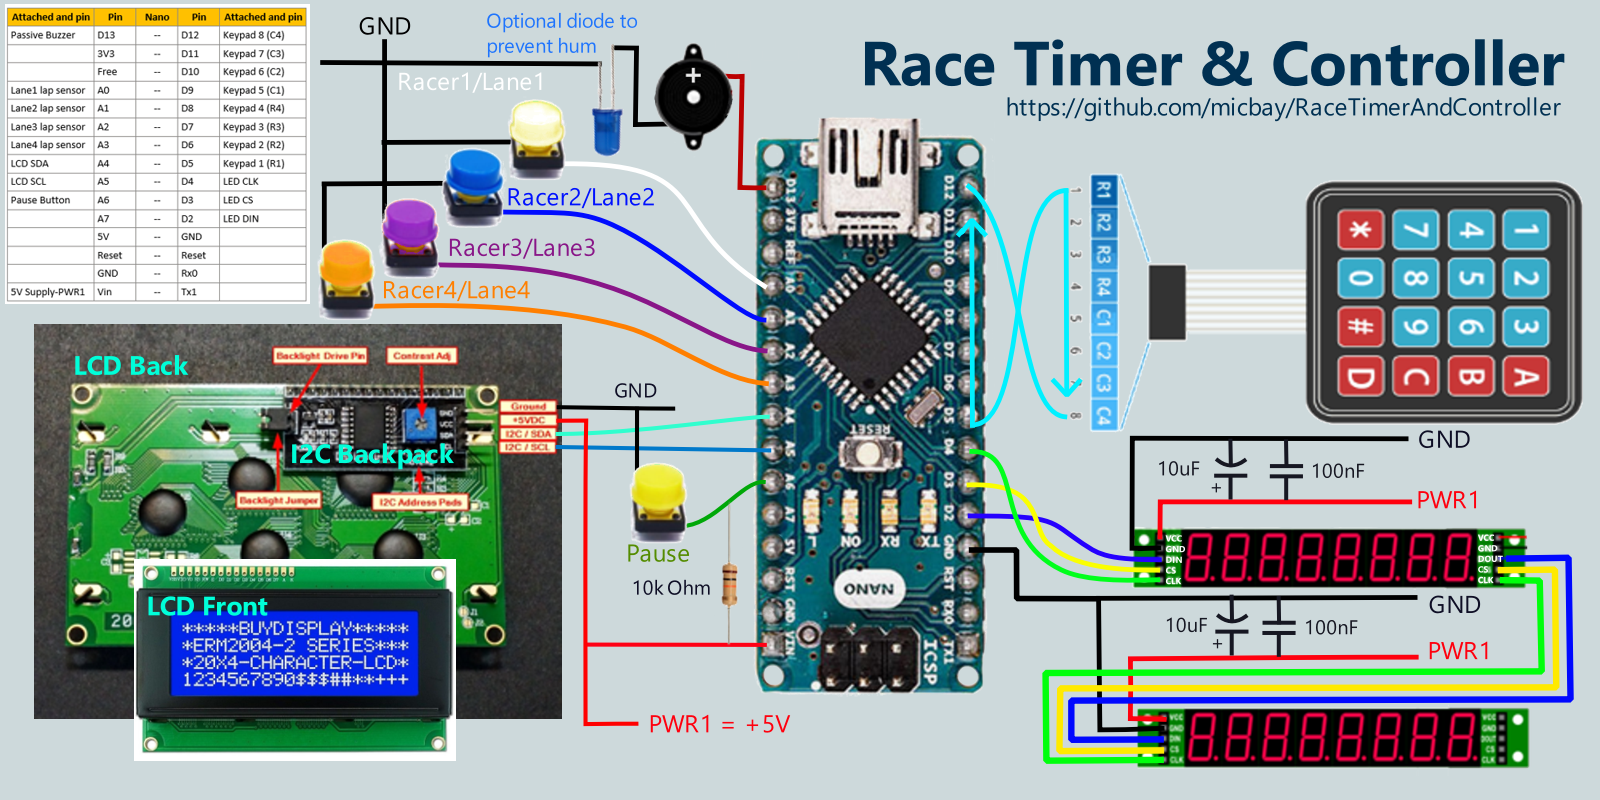 See how fast you can run a 100m dash with this Arduino timer